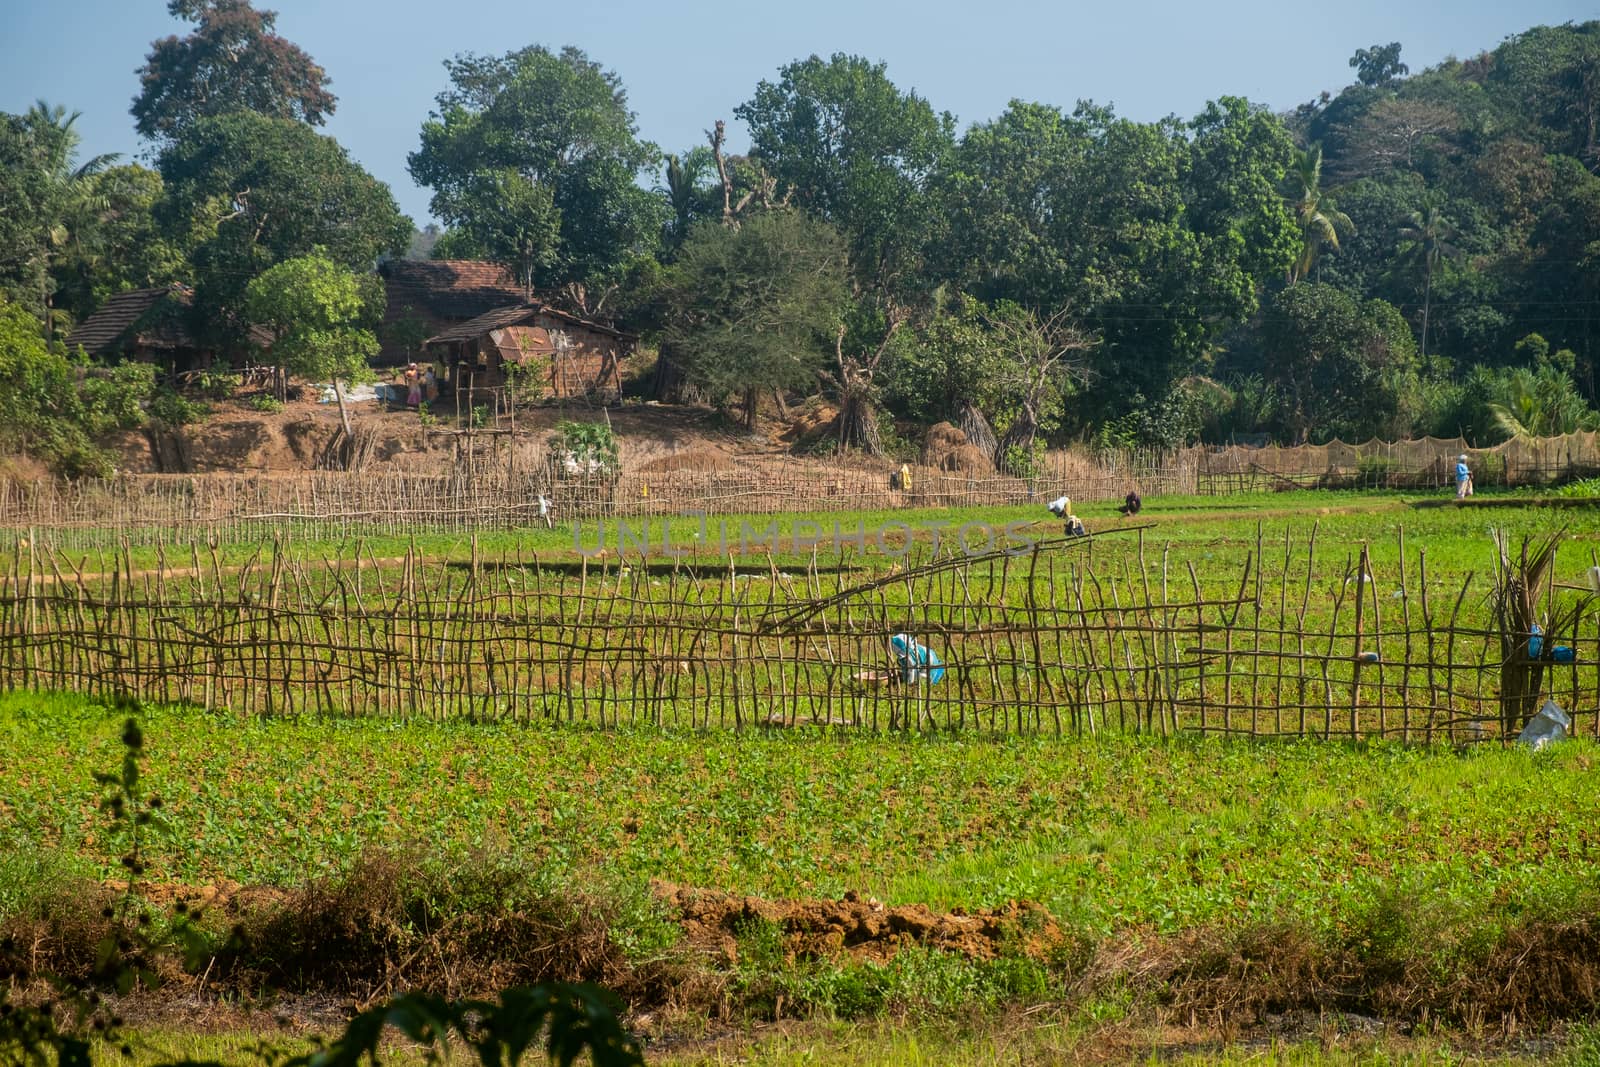 Farmers working at field in India.